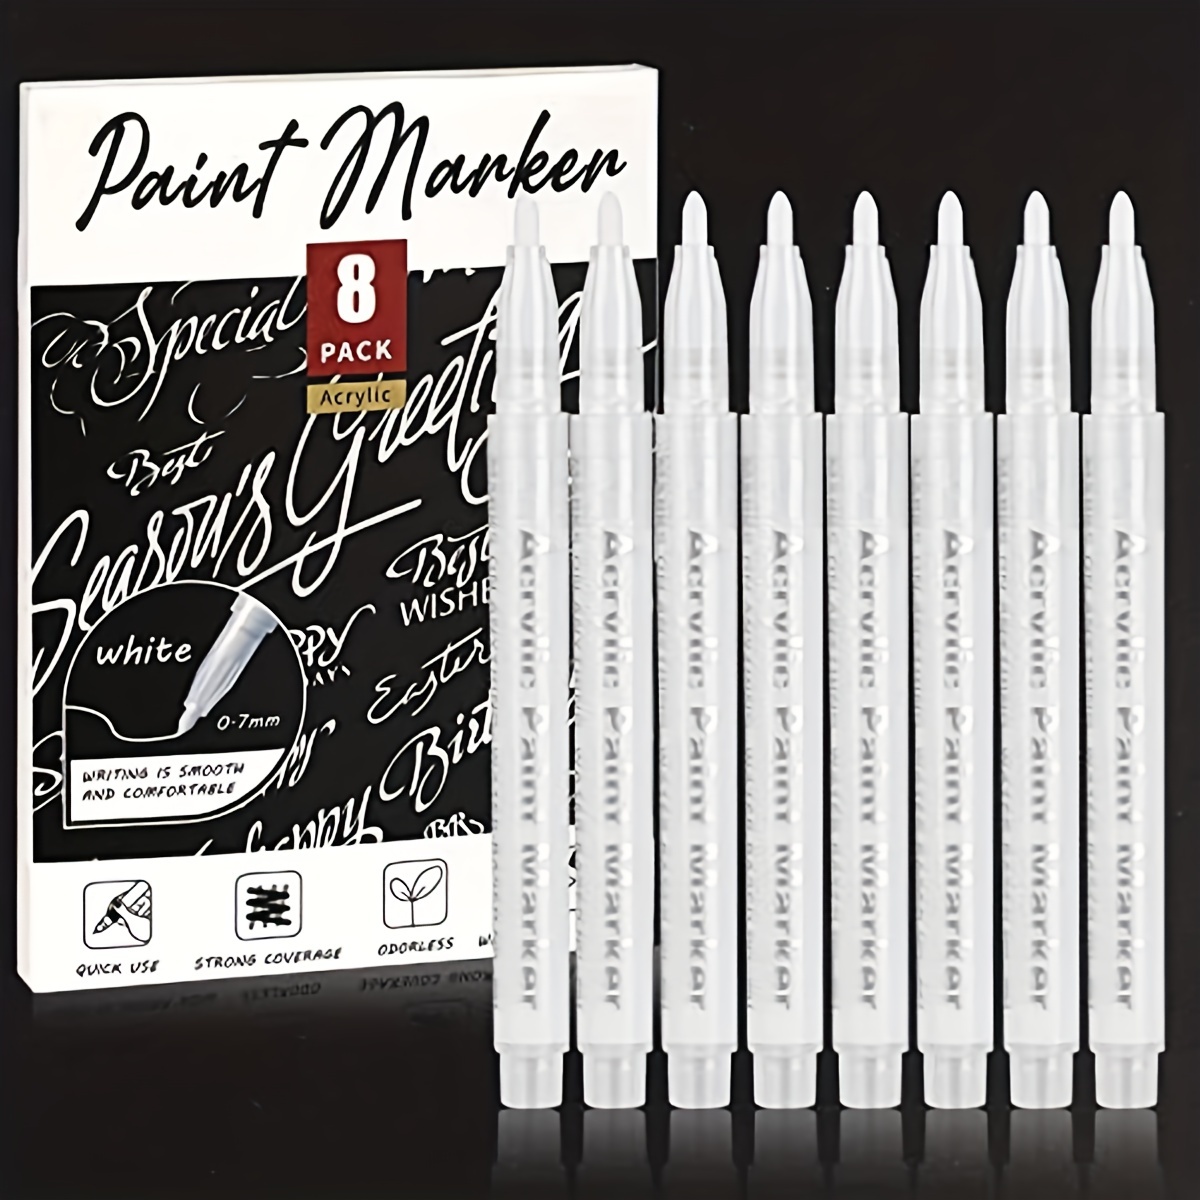 White Paint Pen,4 Pack 0.7mm Acrylic White Permanent Marker White Paint  Pens for Rock Painting Stone Ceramic Glass Wood Plastic Glass Metal Canvas